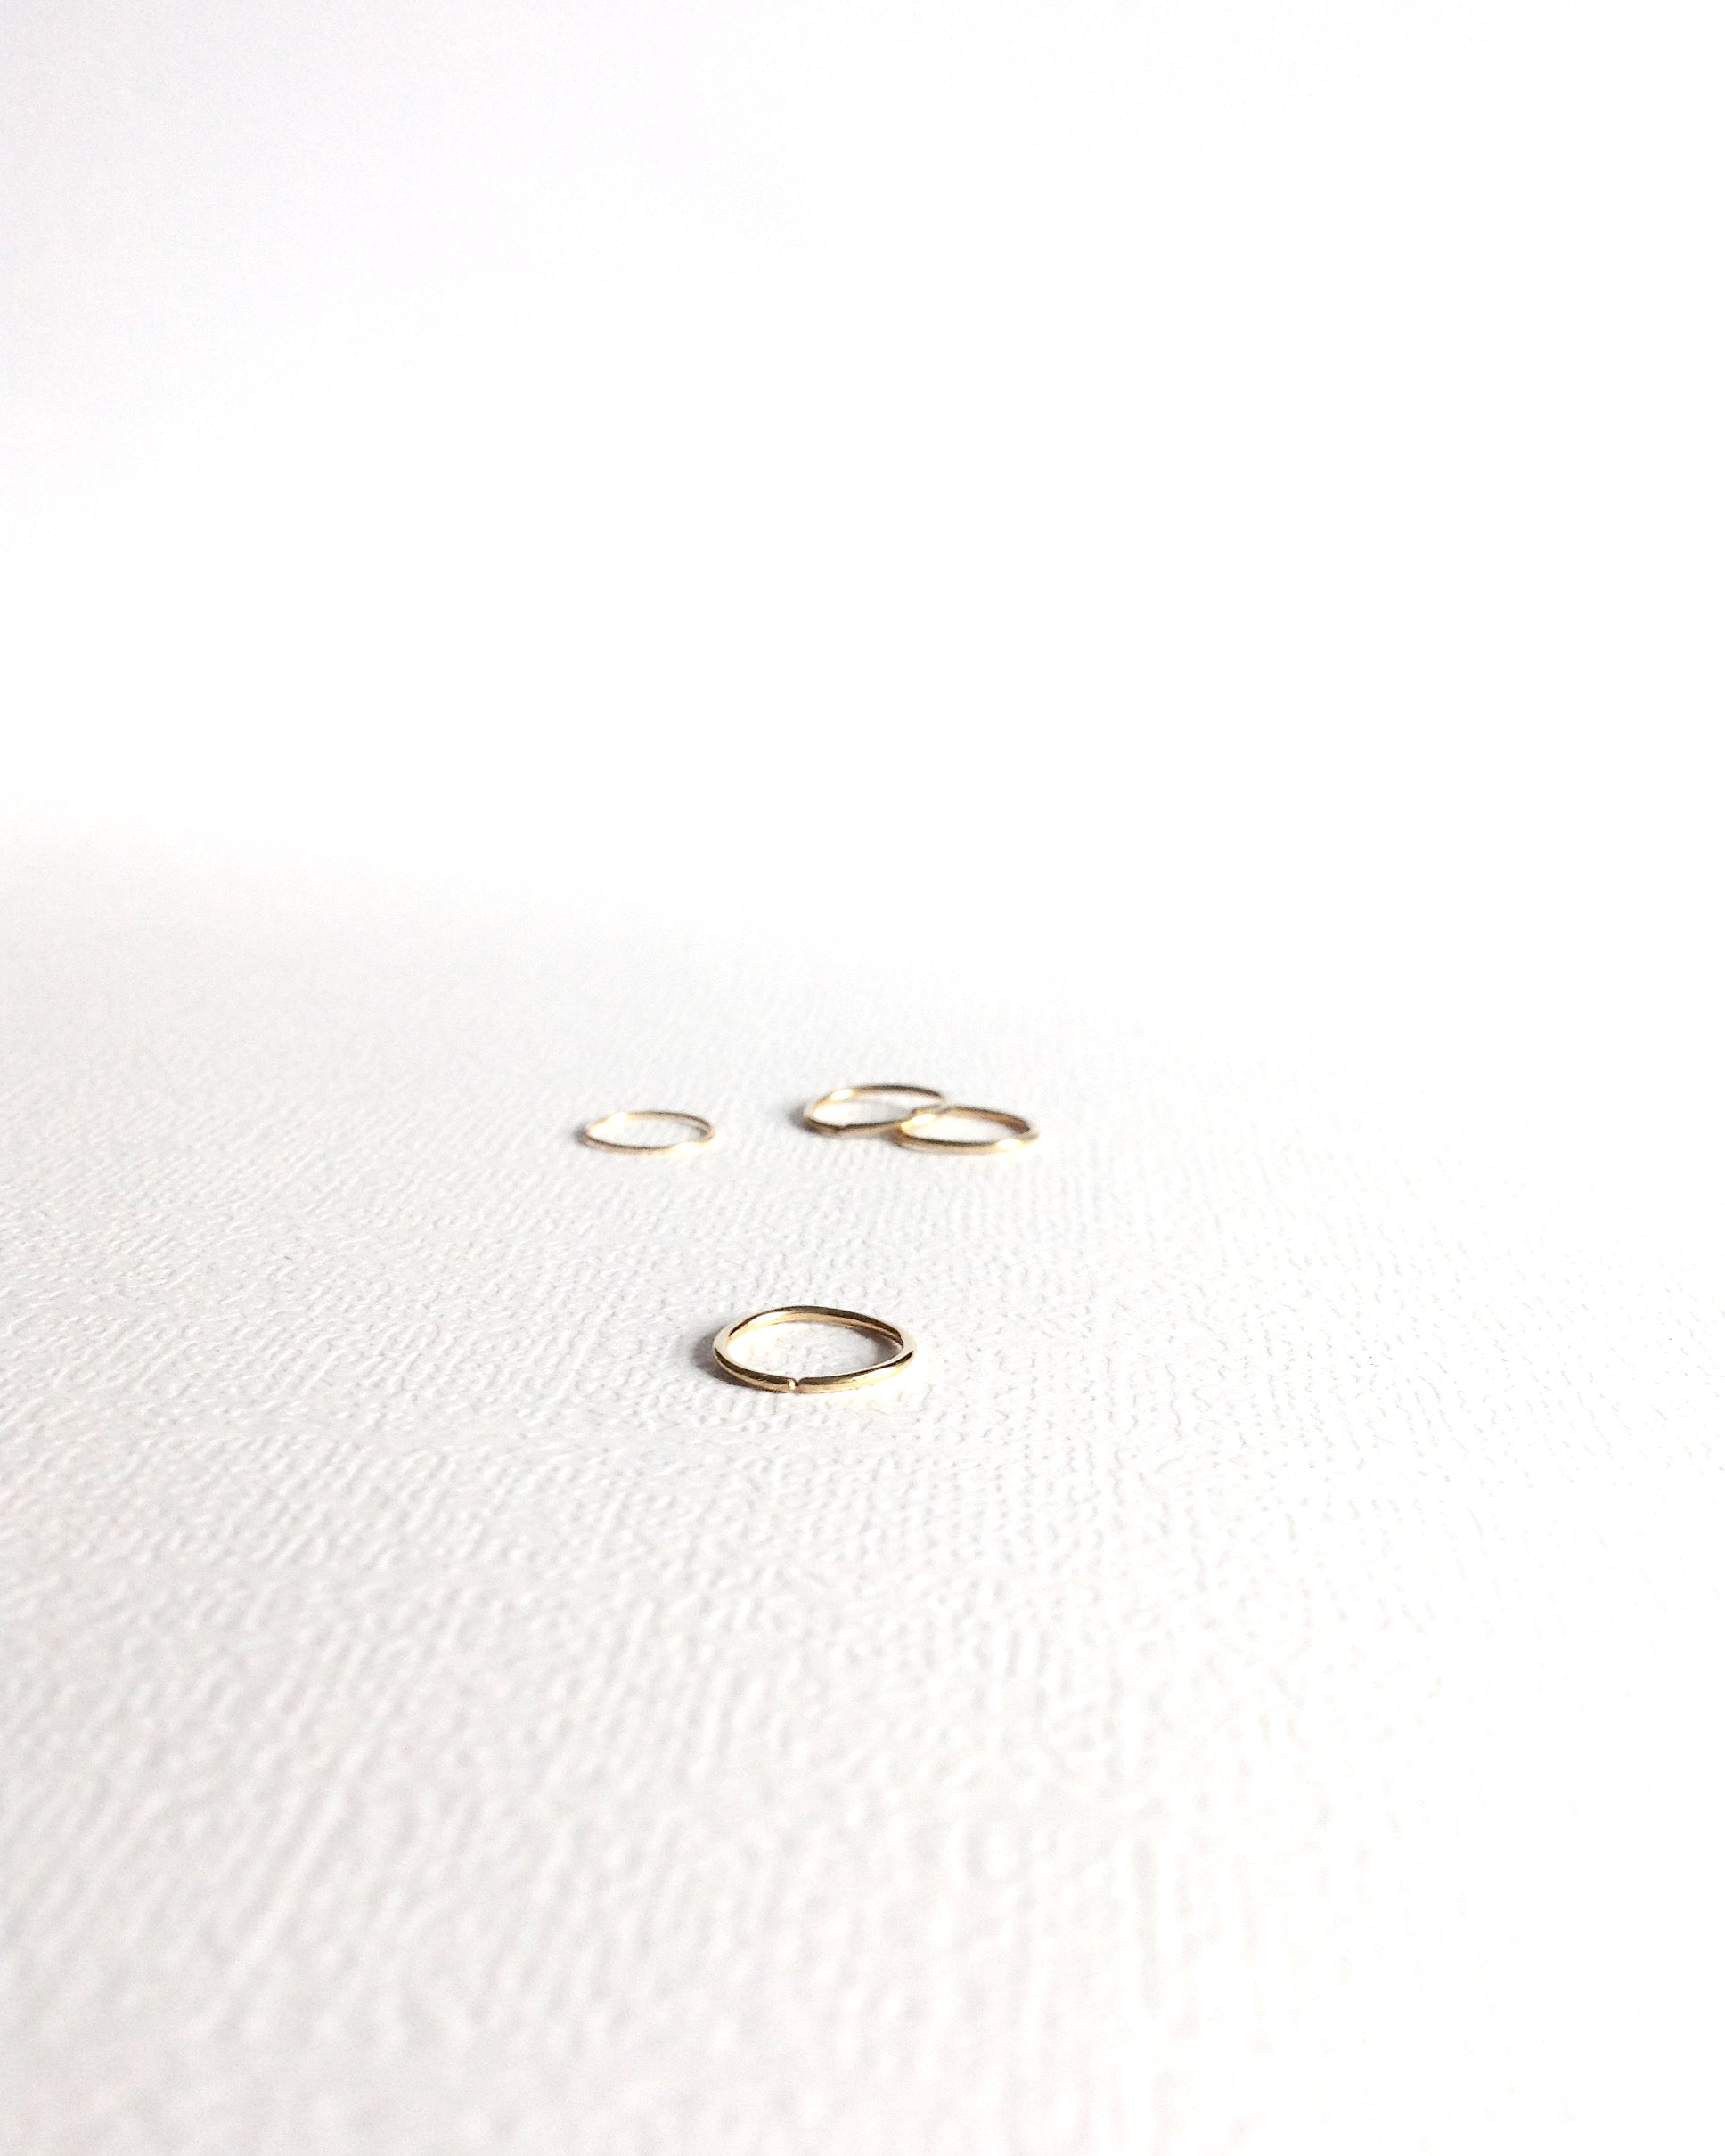 Tiny Cartilage Hoop | 4mm 5mm 6mm or 7mm Endless Hoop in Gold Filled Sterling Silver or Rose Gold Filled | IB Jewelry